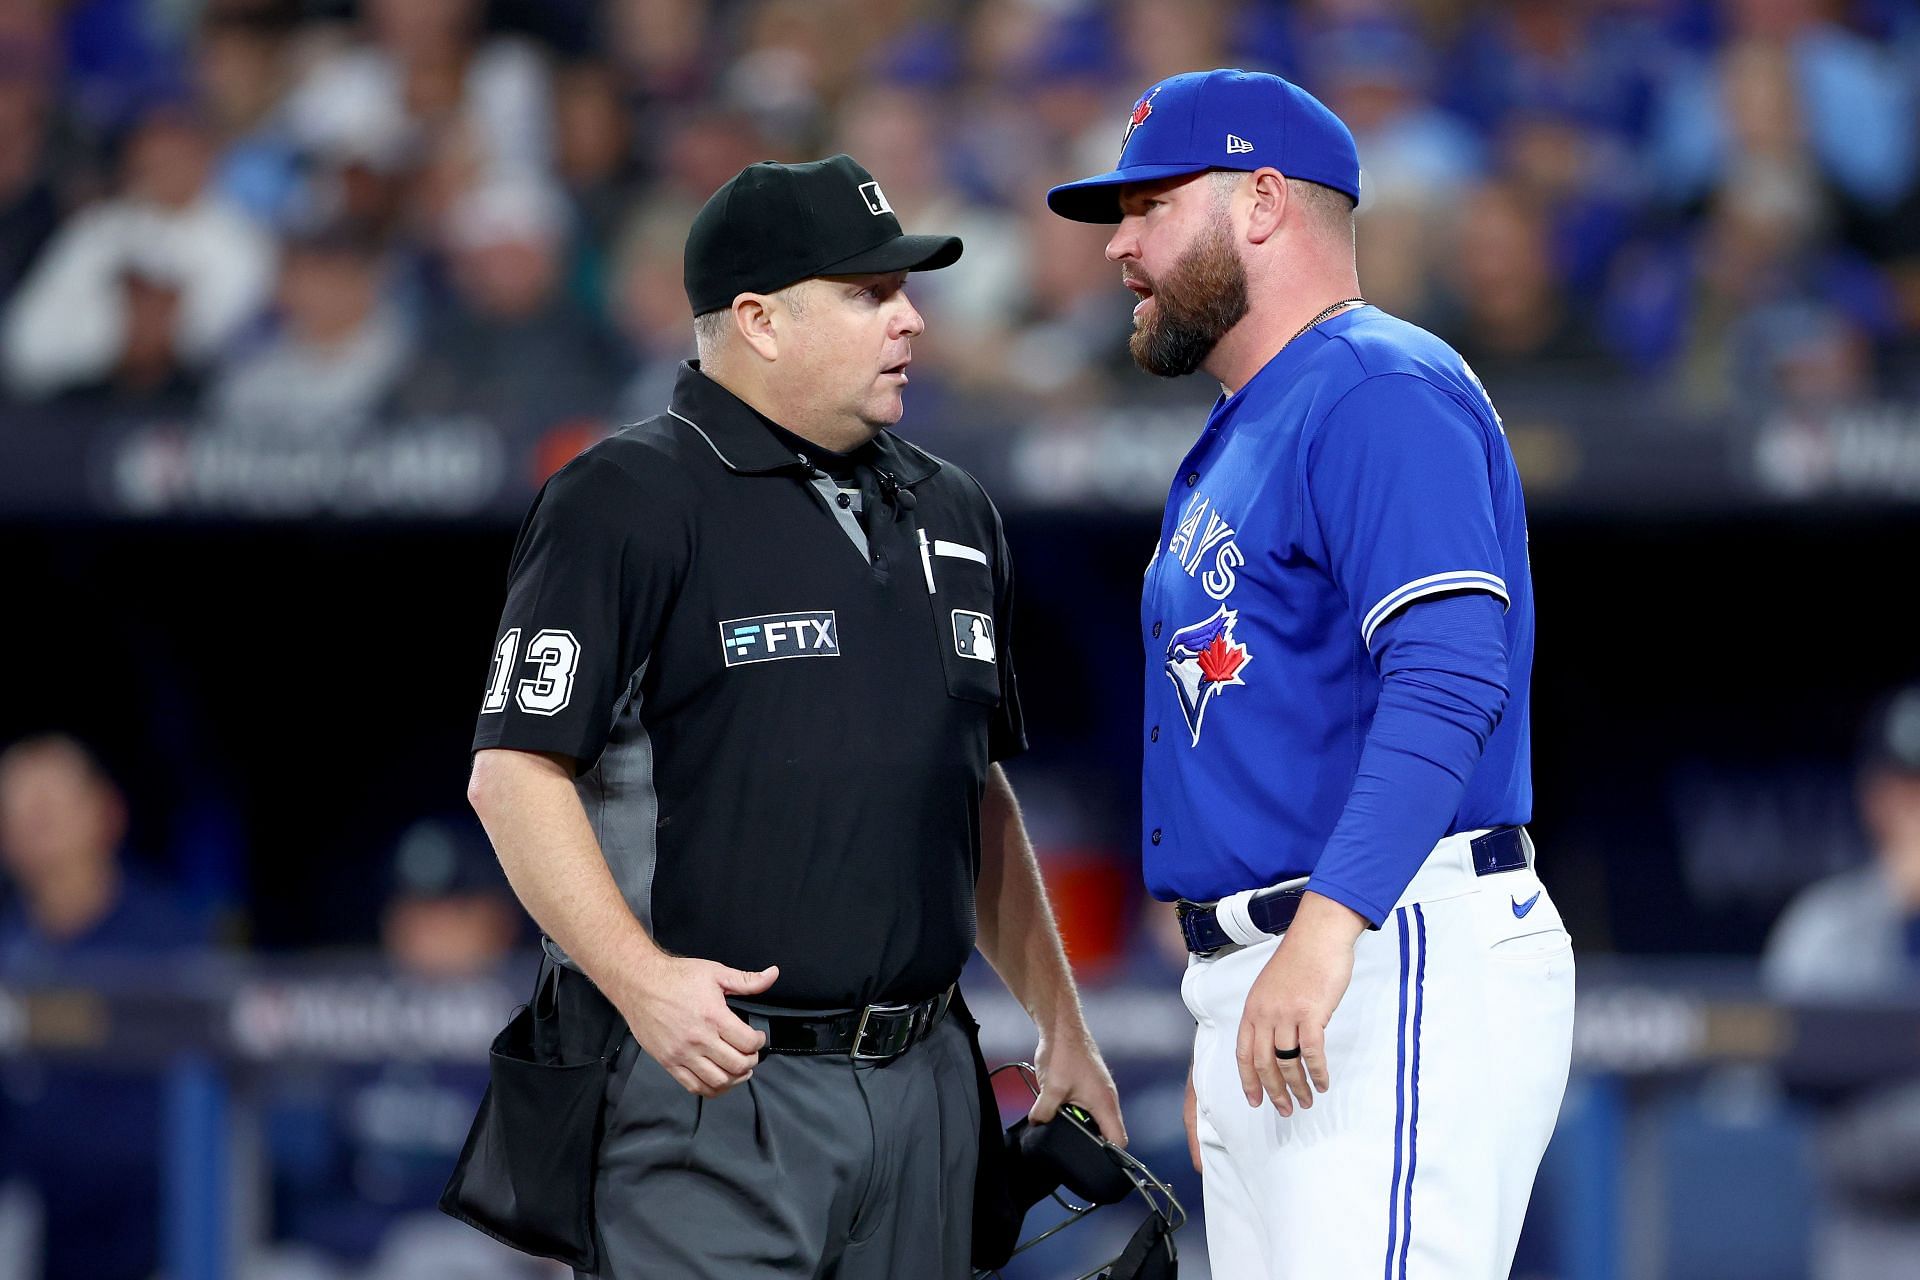 Umpire Todd Tichenor was asigned as crew chief for the 2023 MLB All-Star Game.